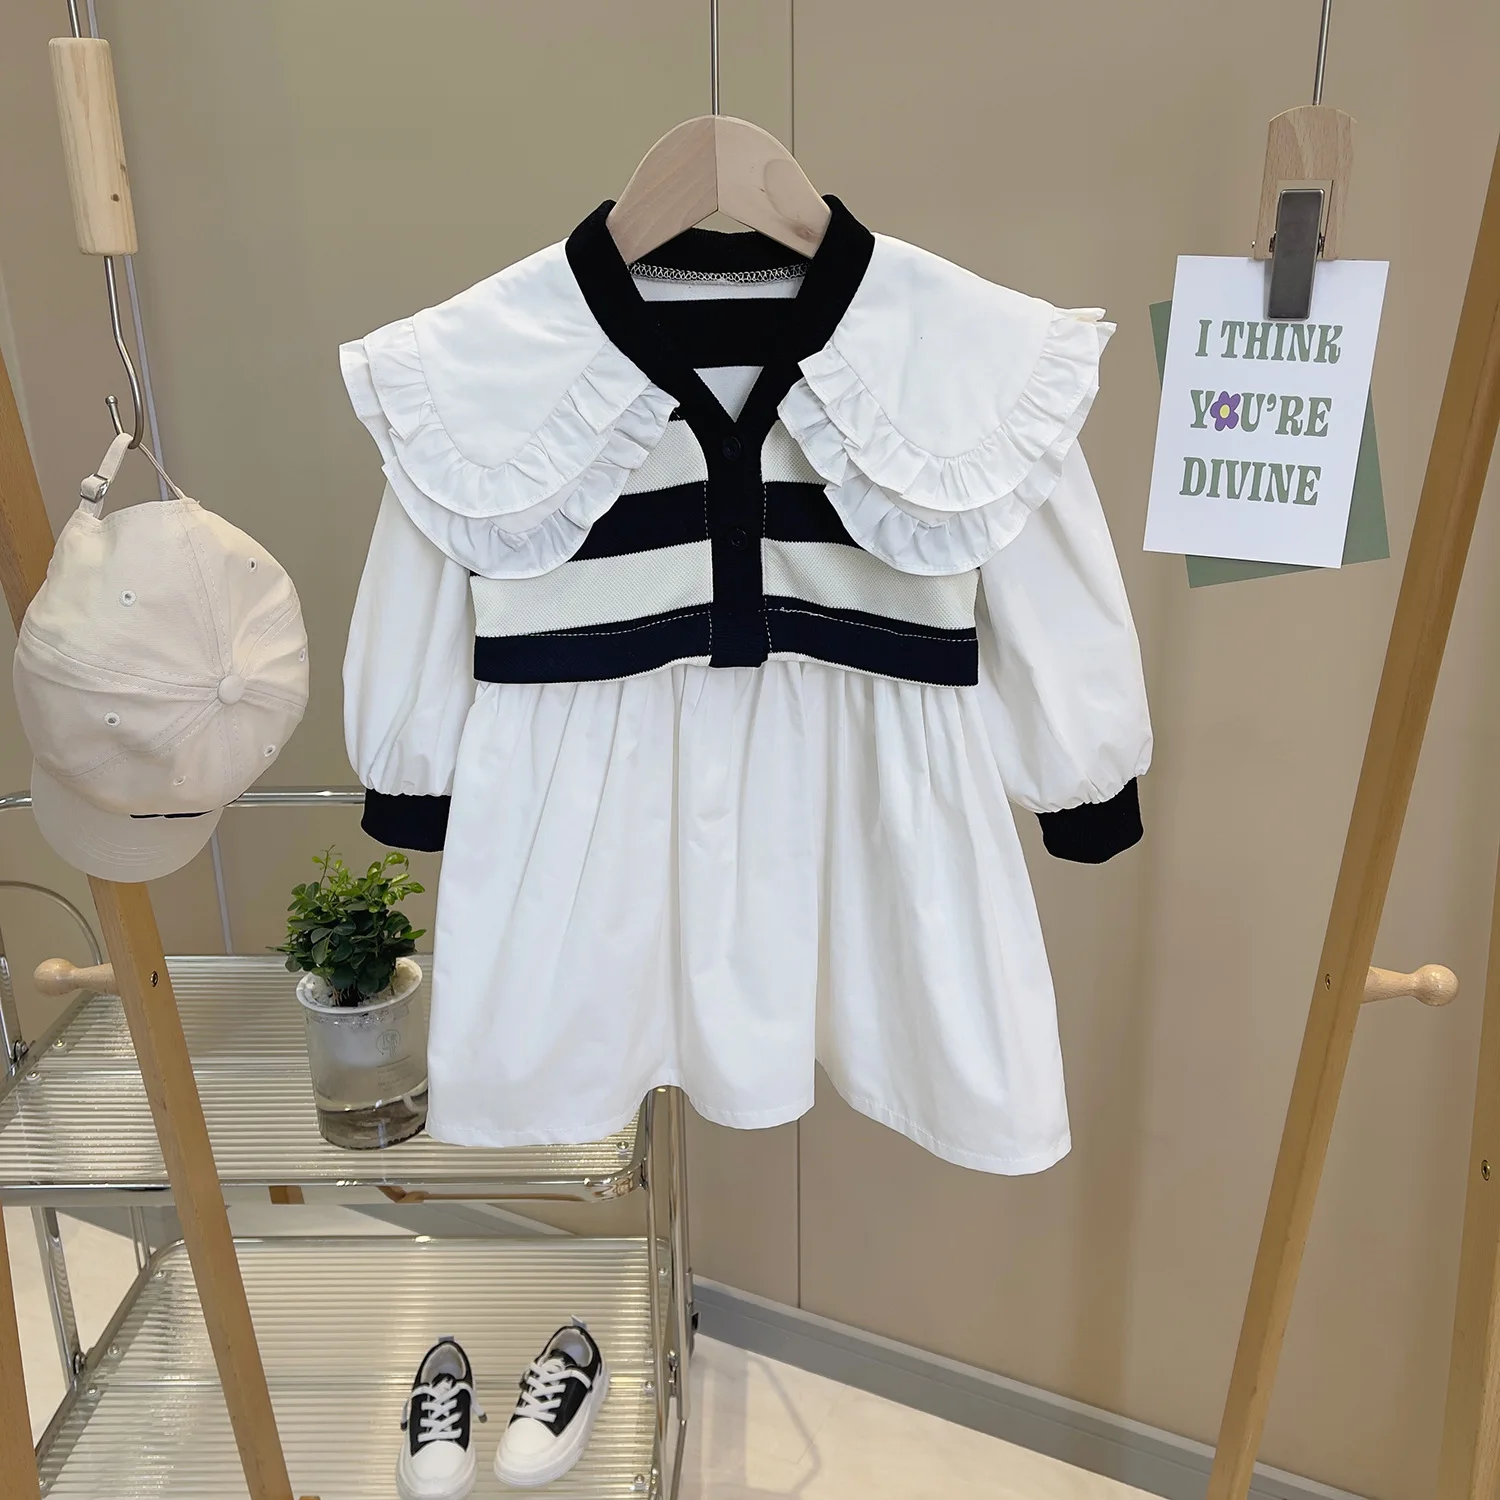 

Autumn Girls Dresses Black White Striped Kids Wear Bowknot Decorated Princess Dress New Arrival Cute Spring